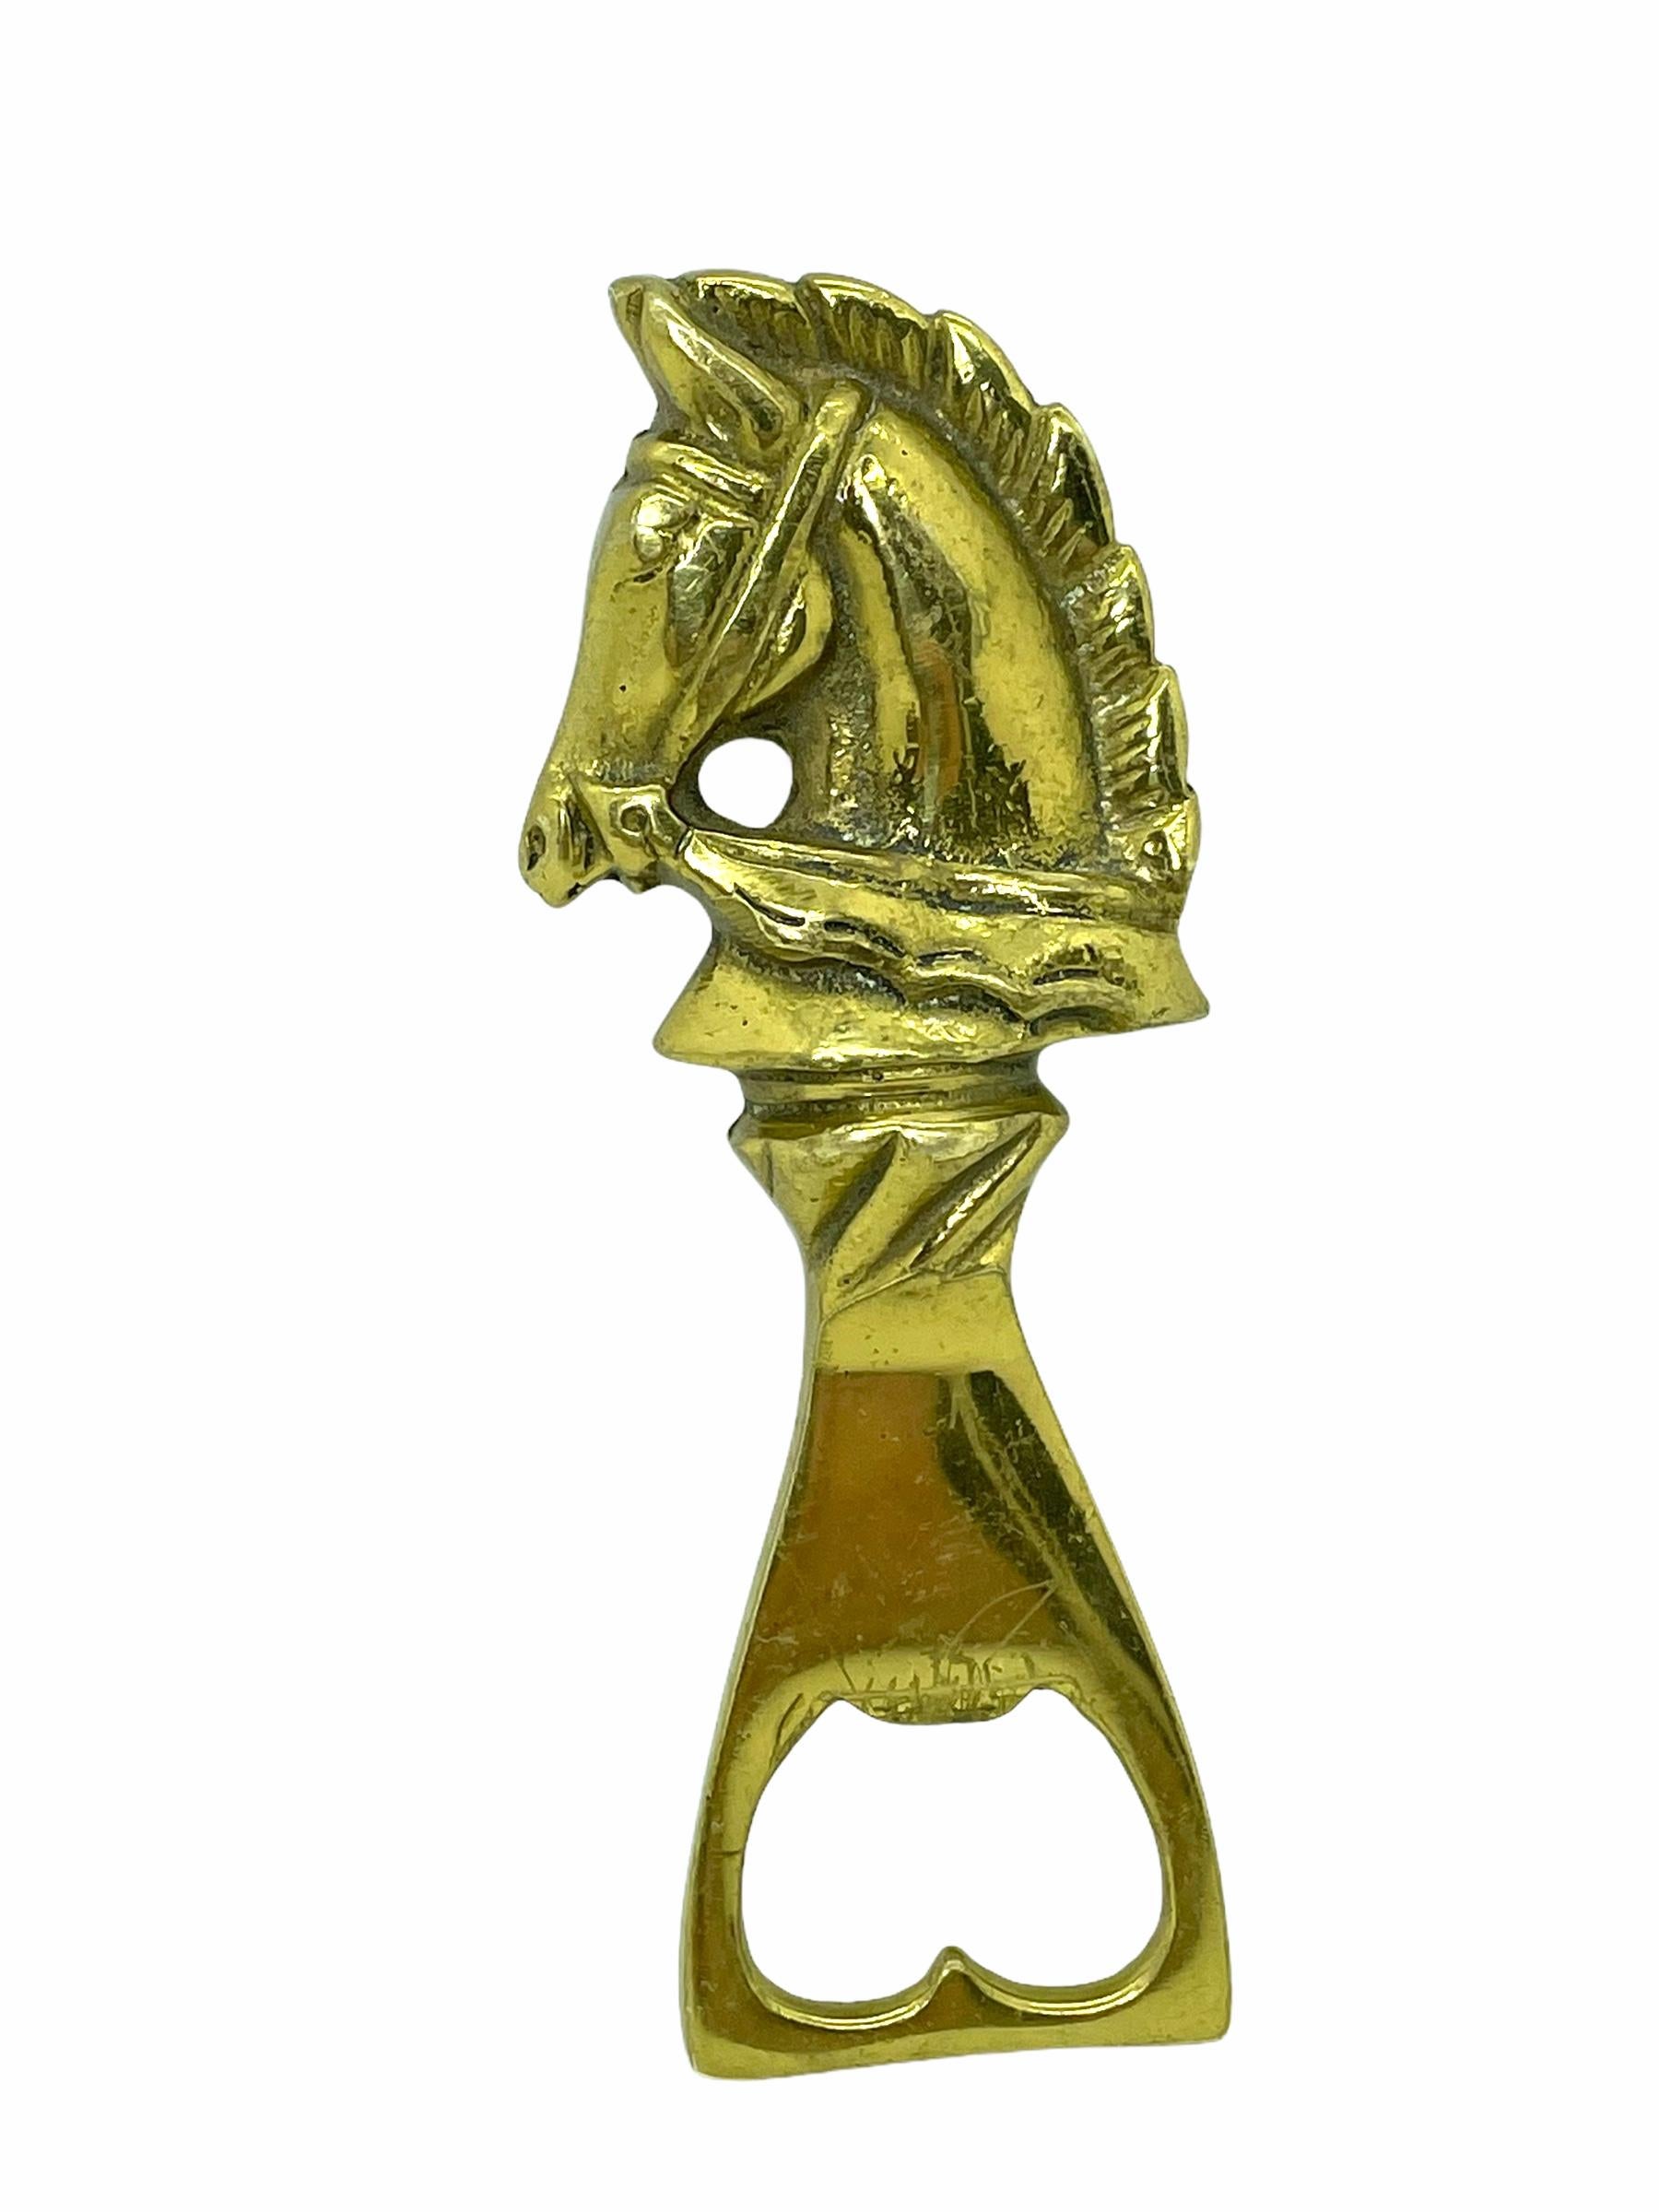 Classic early 1970s bottle opener. Nice addition to your room or just for use at your bar or bar cart. Found at an estate sale in Germany.